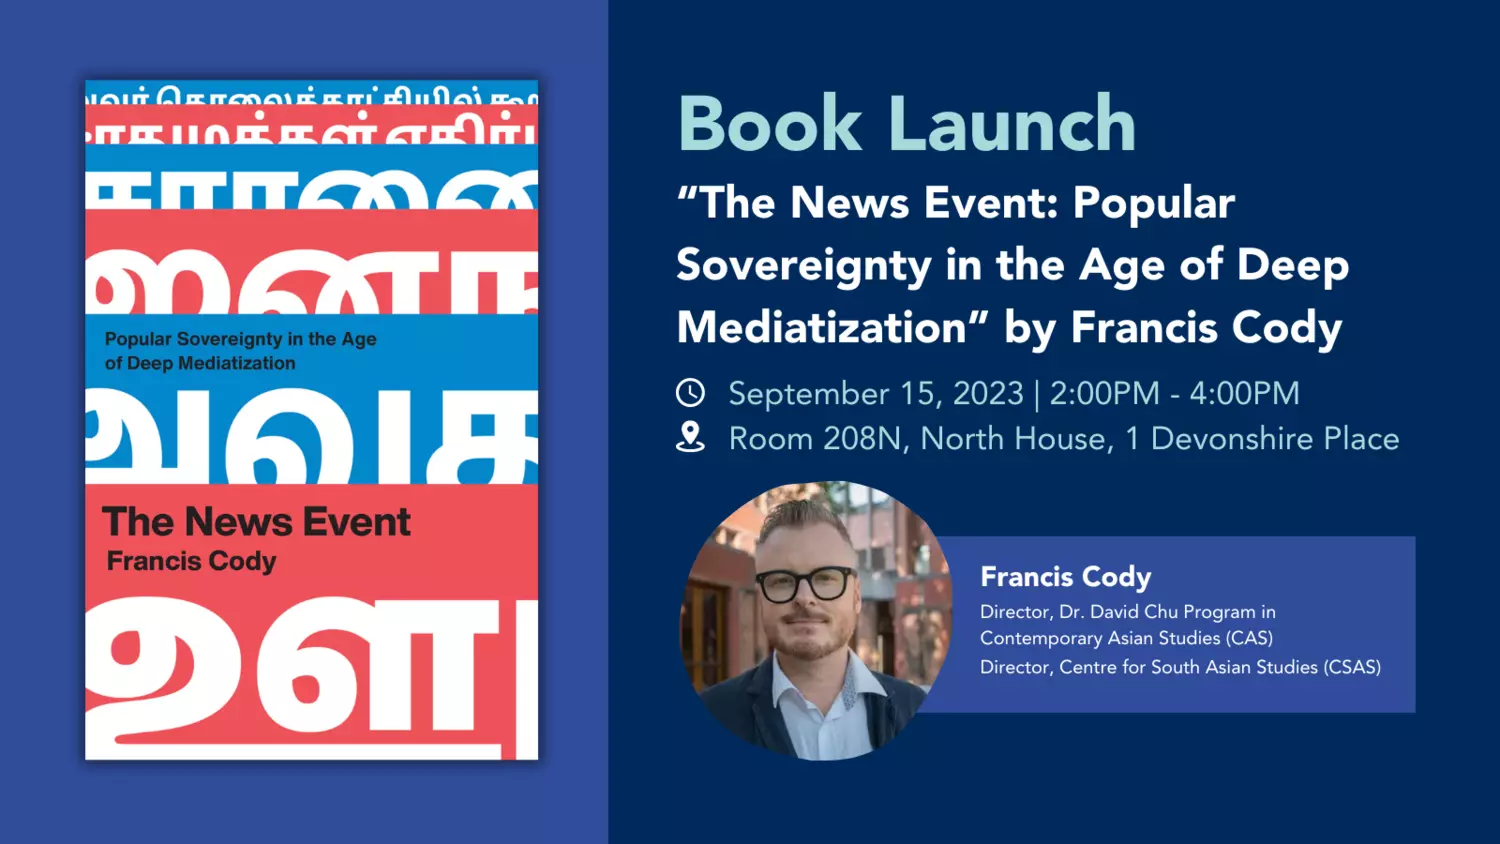 Francis Cody Book Launch Poster reiterating details found below in the event description, including title, location, time, and Francis Cody's titles